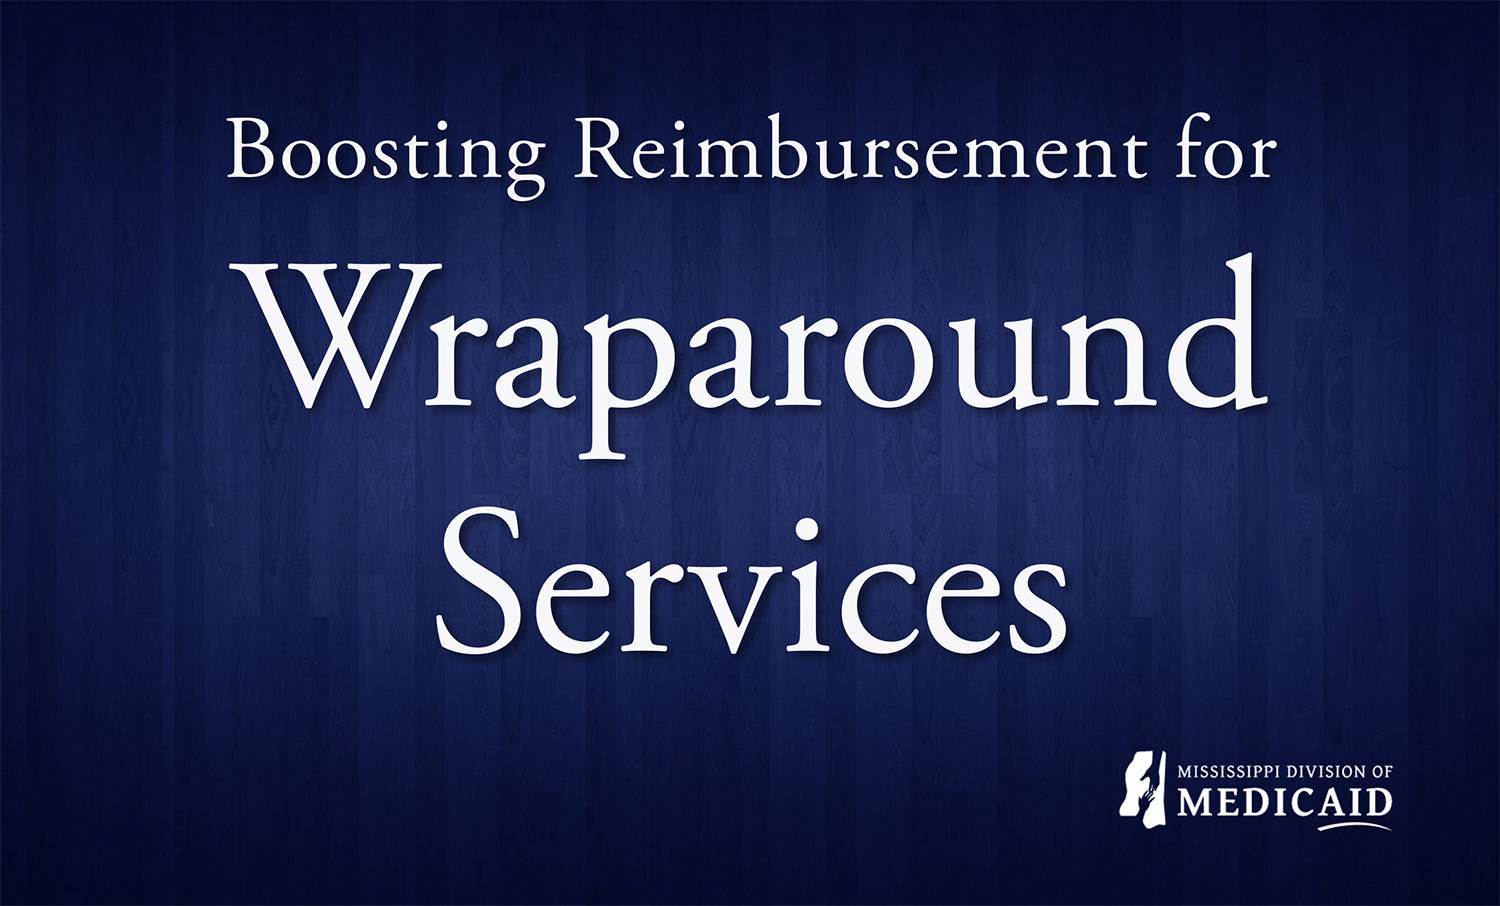 You are currently viewing Mississippi Department of Medicaid Announces Reimbursement Changes for Wraparound Services